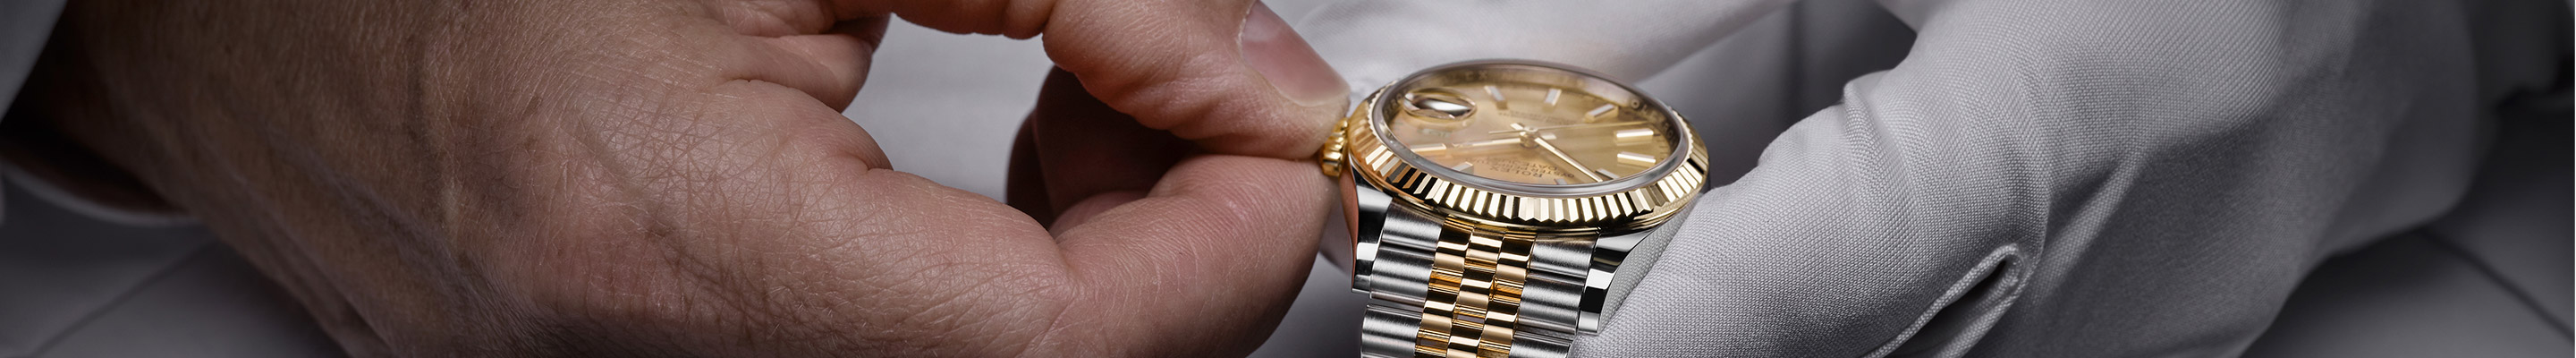 ROLEX WATCH SERVICING AND REPAIR AT KERNS FINE JEWELRY